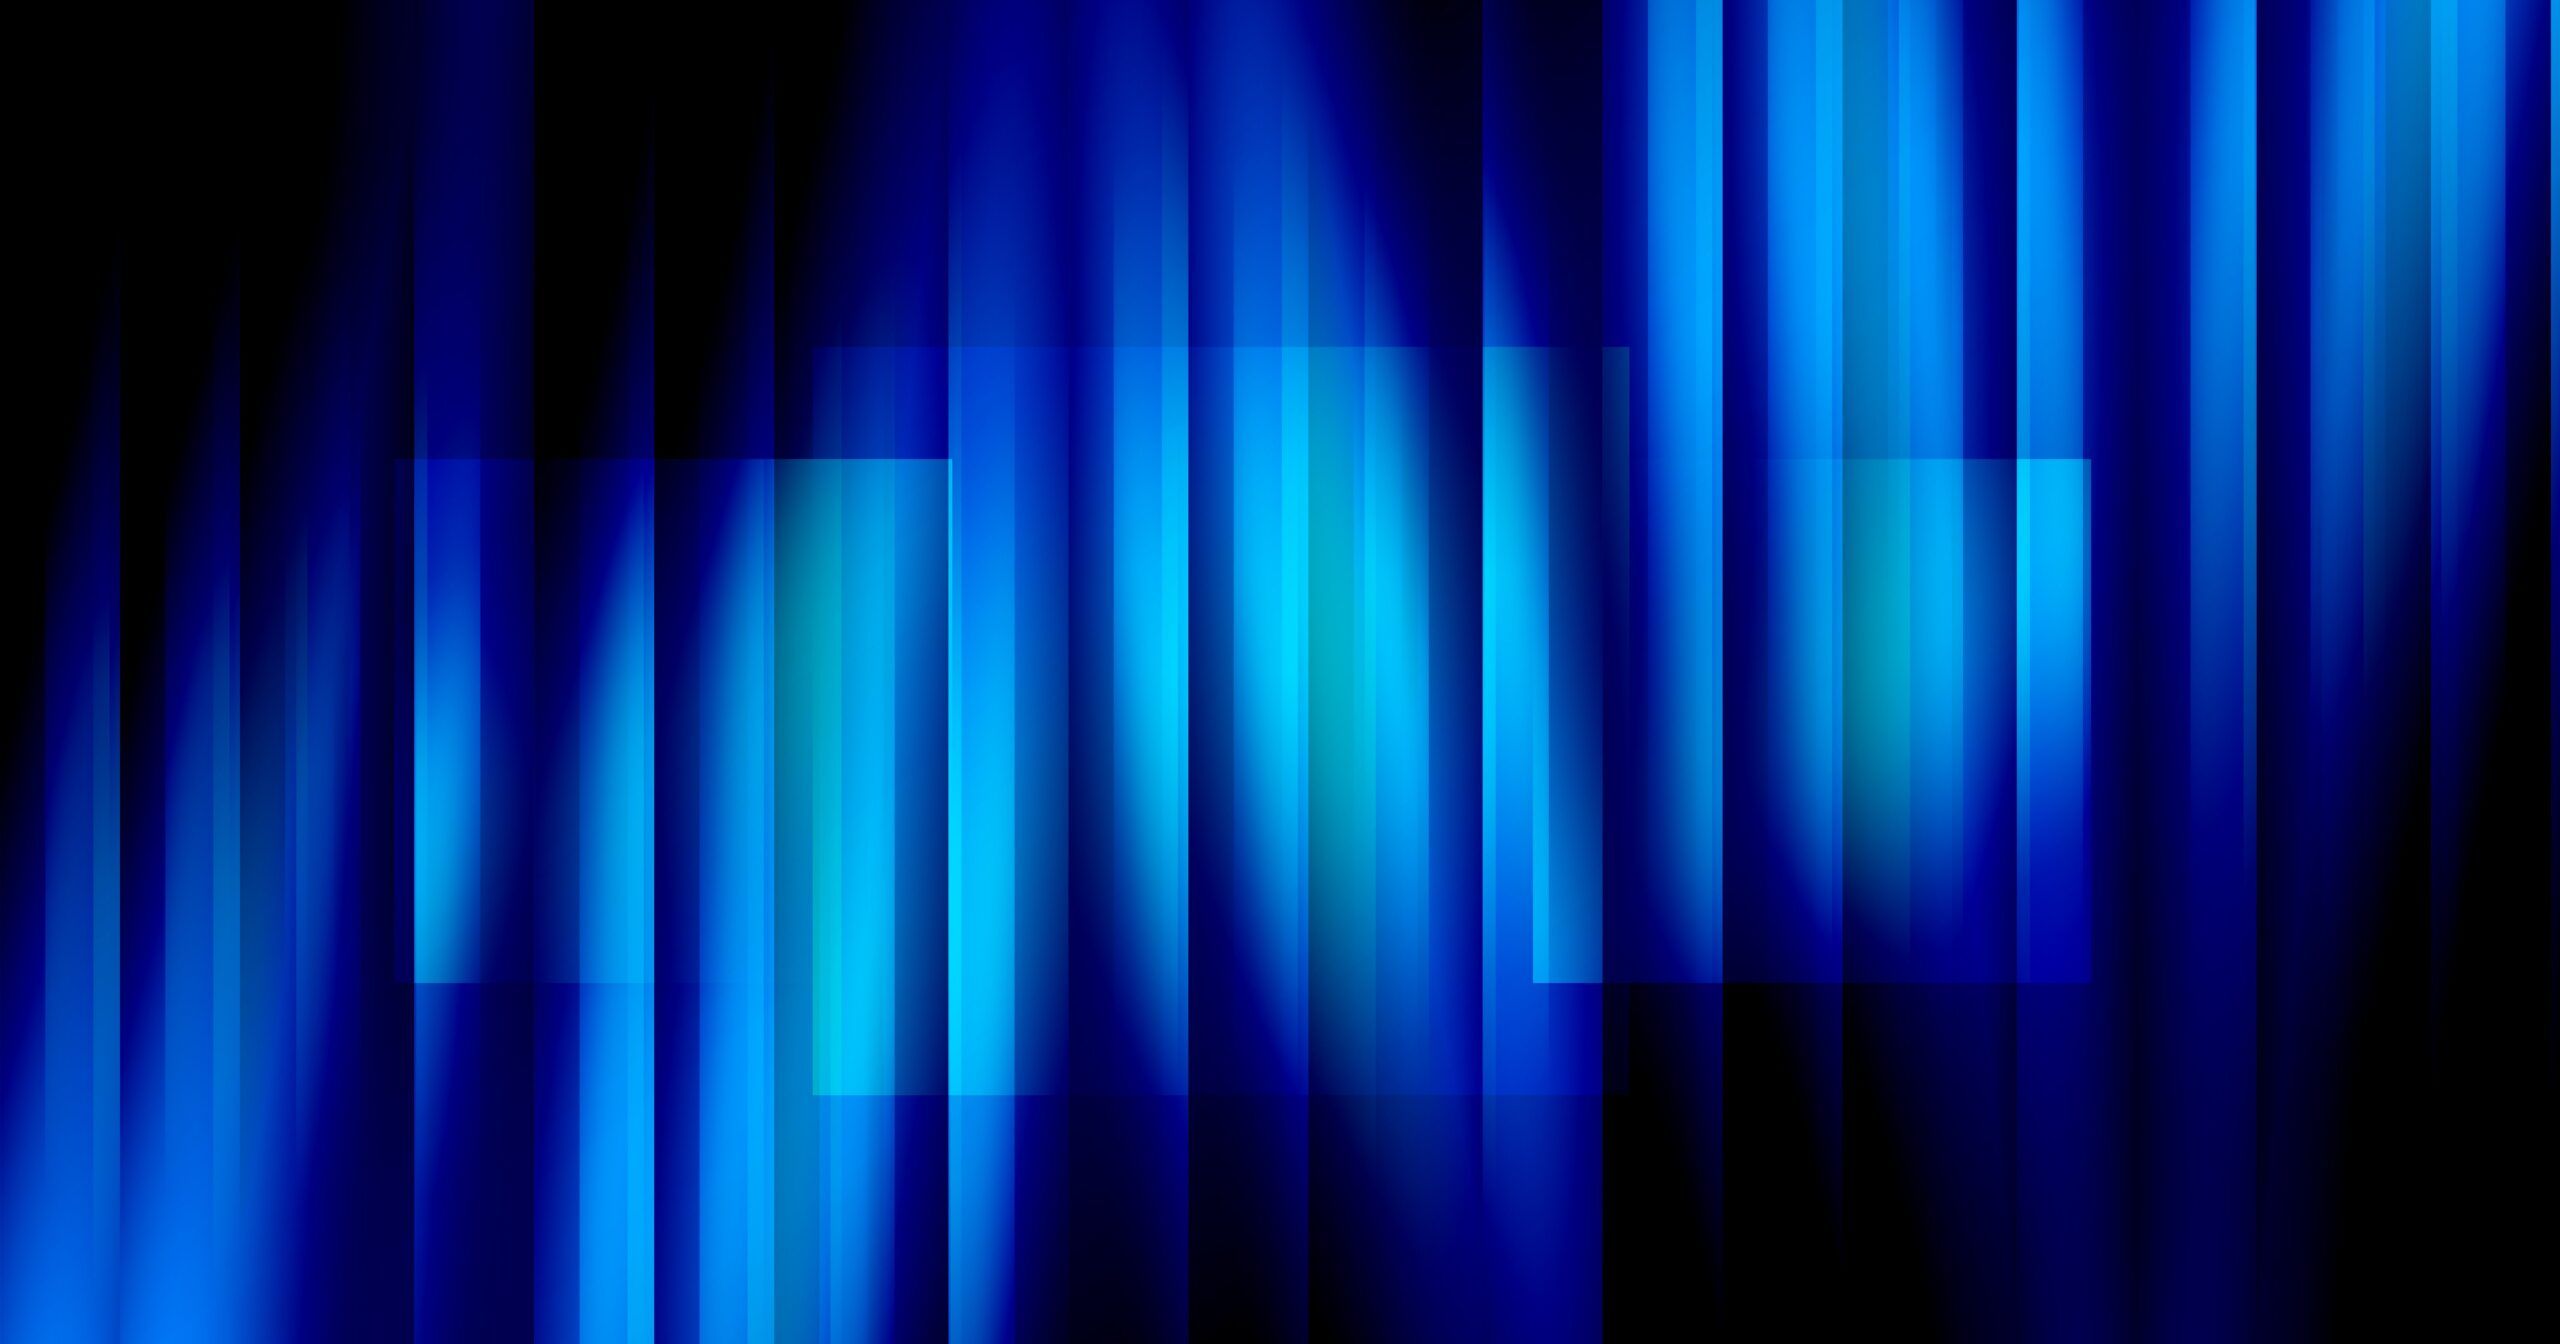 A blue abstract image - YouTube